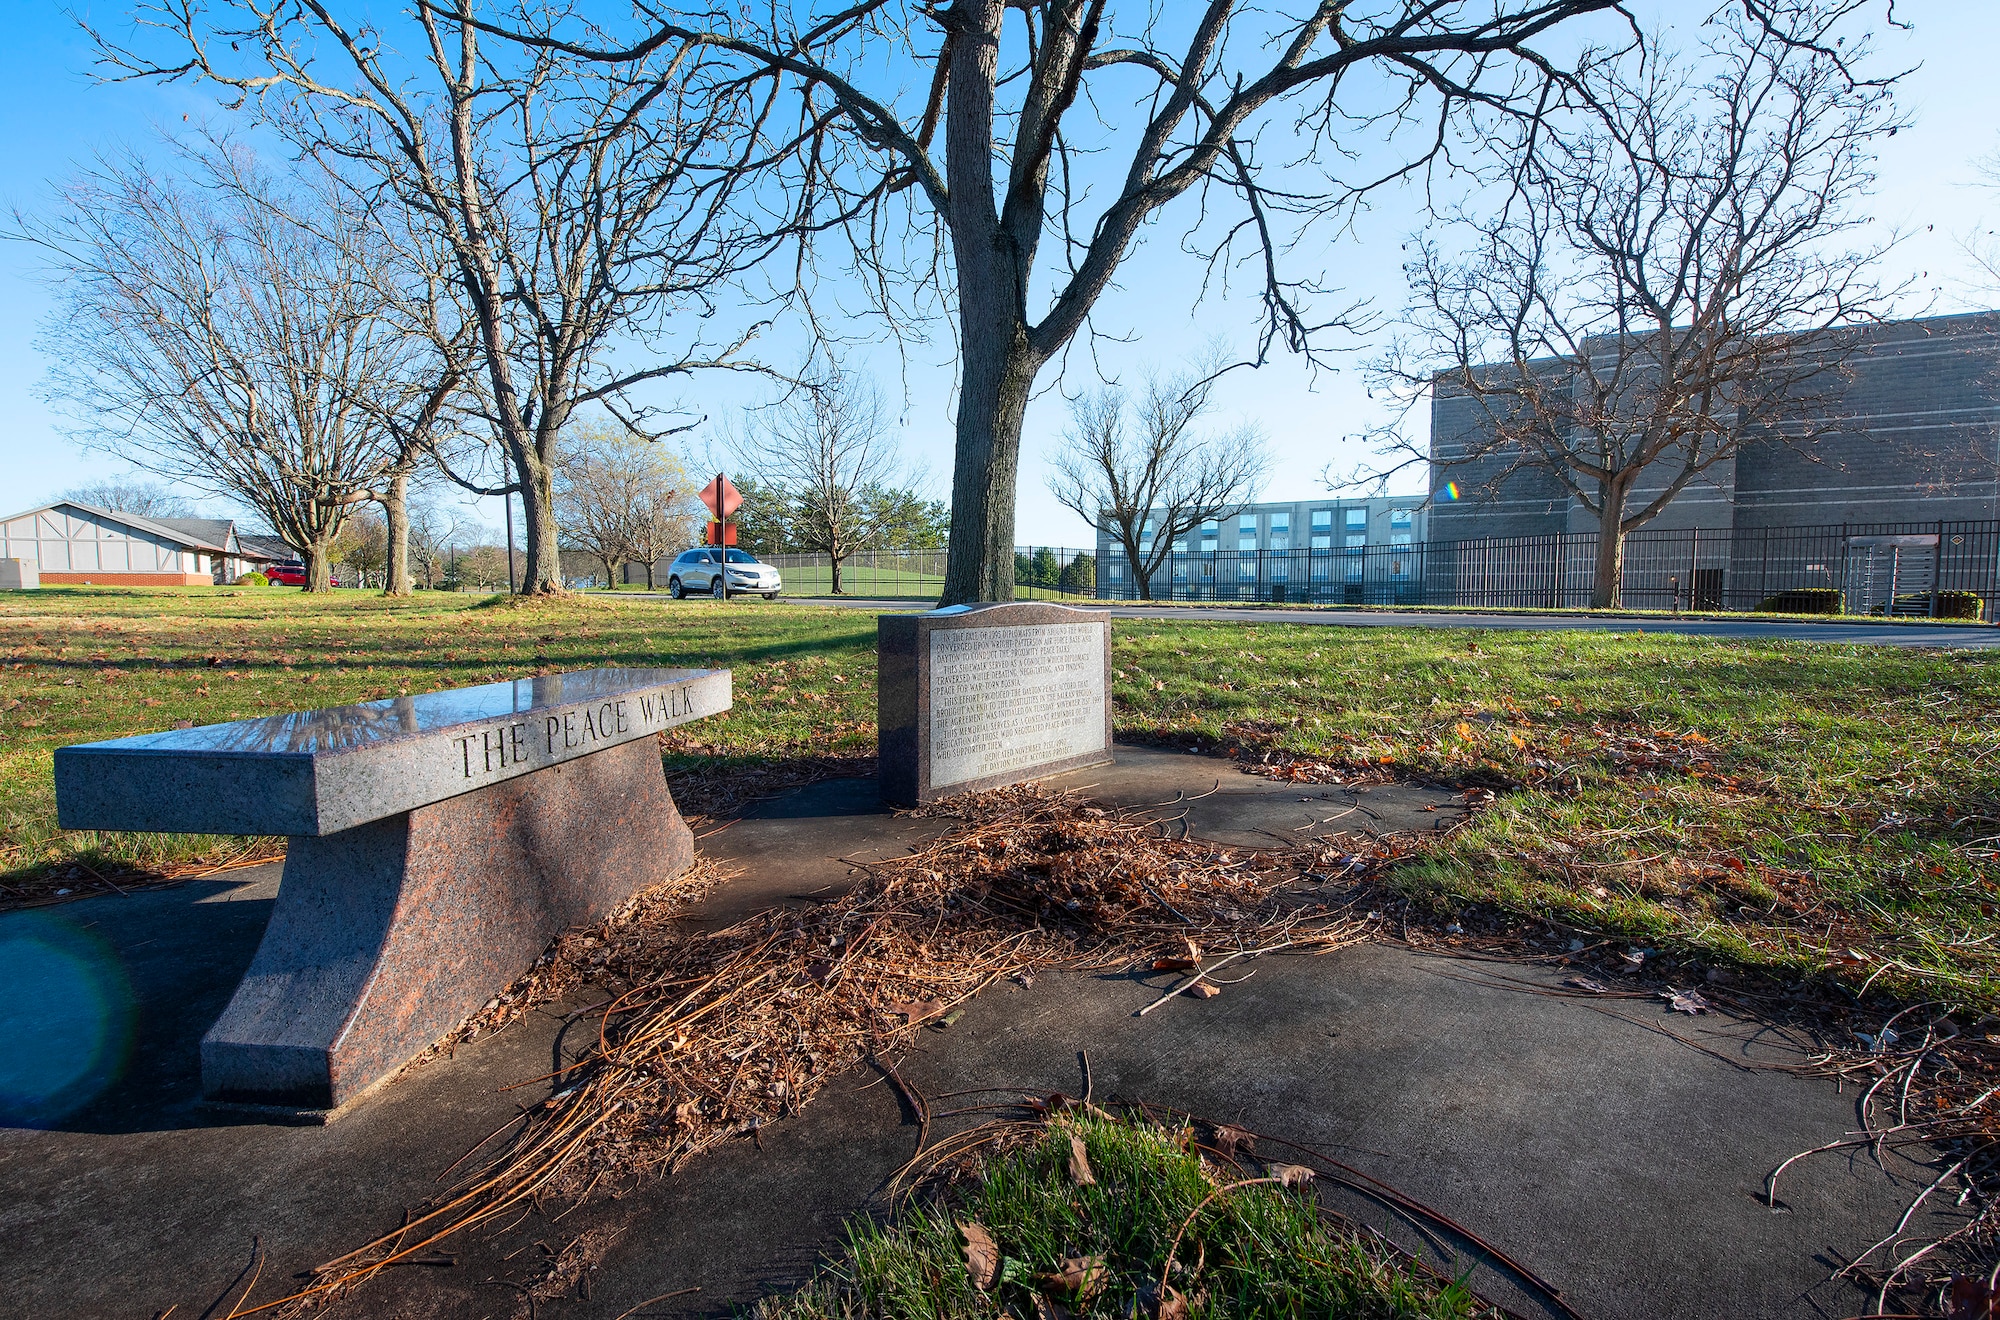 A bench and plaque commemorate The Peace Walk, a winding sidewalk between the Hope Hotel near WPAFB.